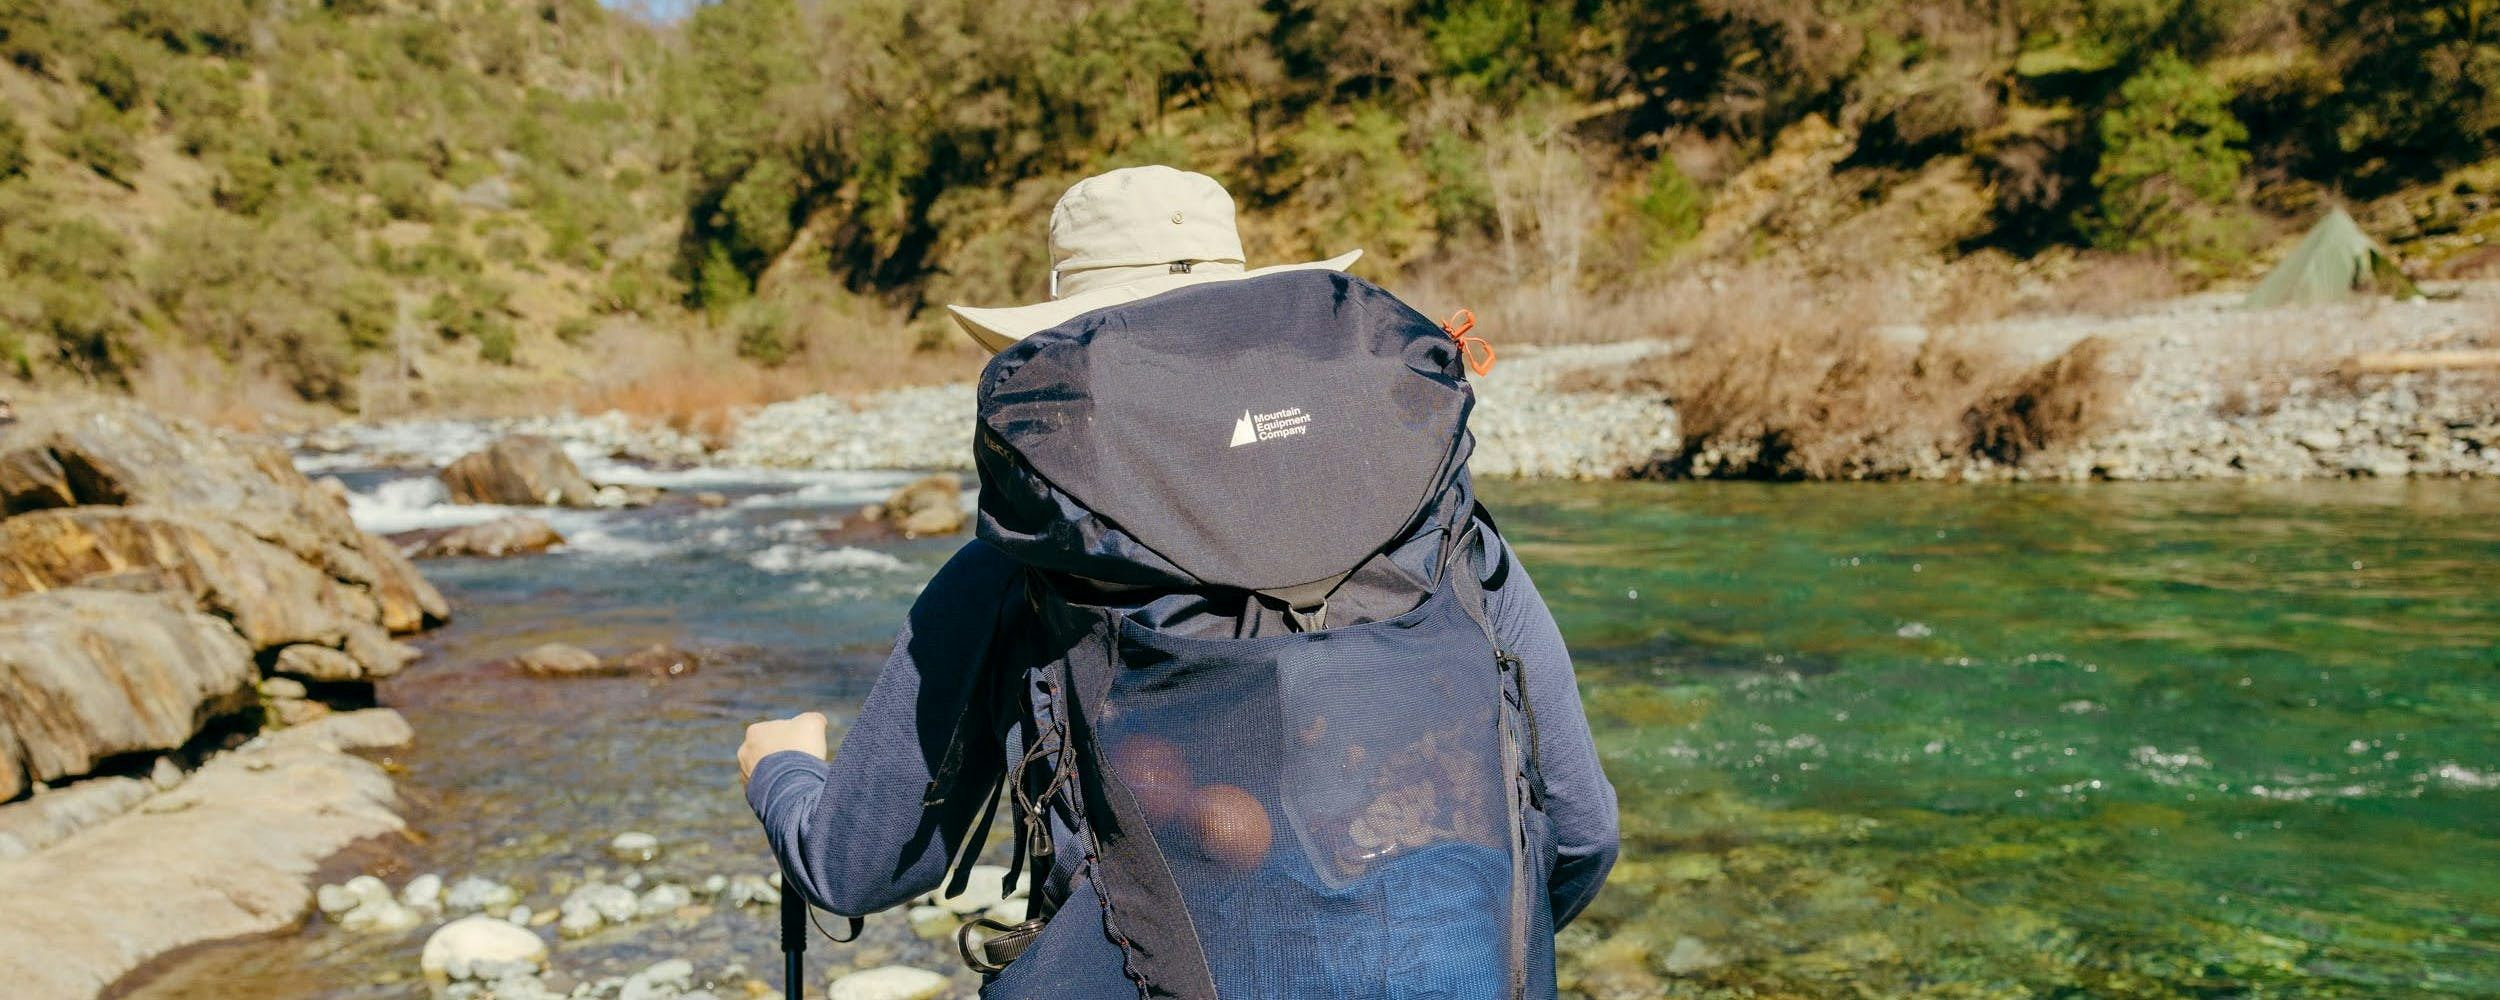 Hiker wearing large backpack with MEC logo with a river in the background